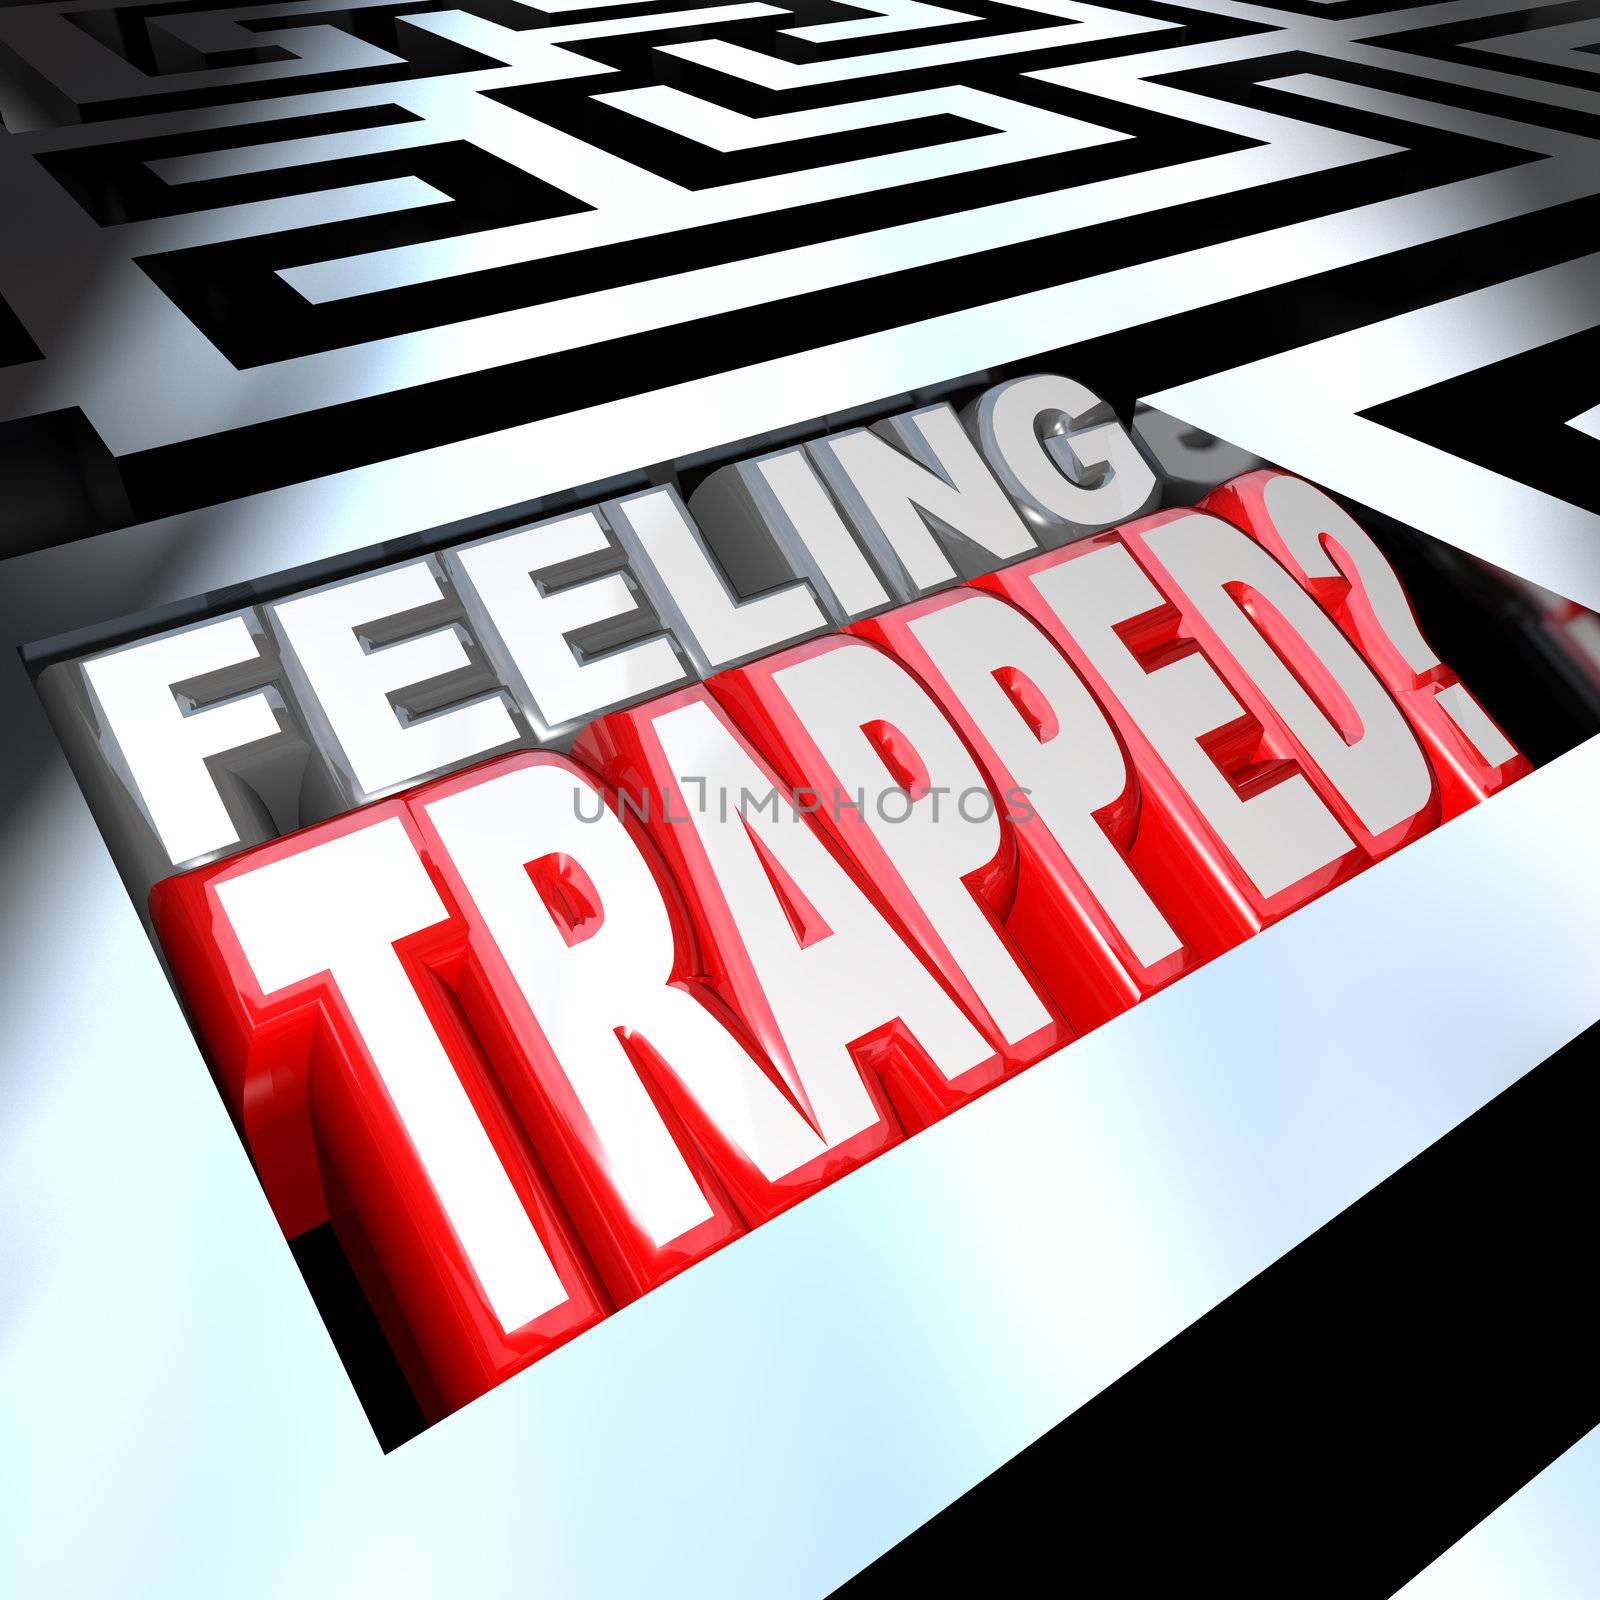 3d illustrated words Feeling Trapped in a maze to represent the difficulty of a hard problem or trouble that is keeping you lost in confusion behind barriers or obstacles